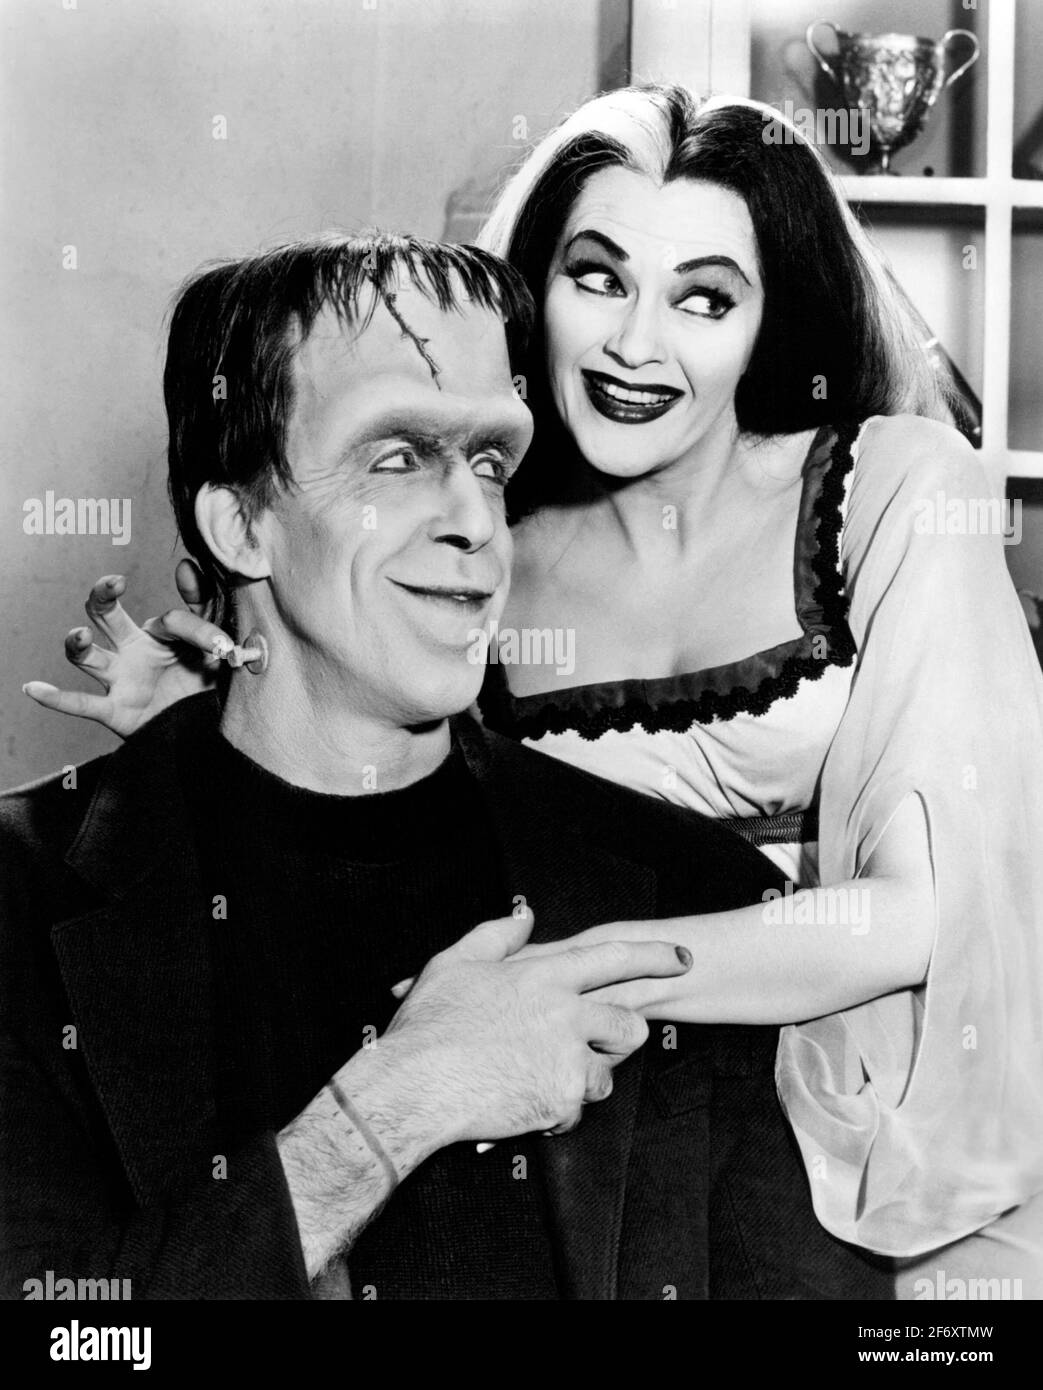 YVONNE DE CARLO and FRED GWYNNE in THE MUNSTERS (1964). Credit: CBS/MCA/UNIVERSAL / Album Stock Photo